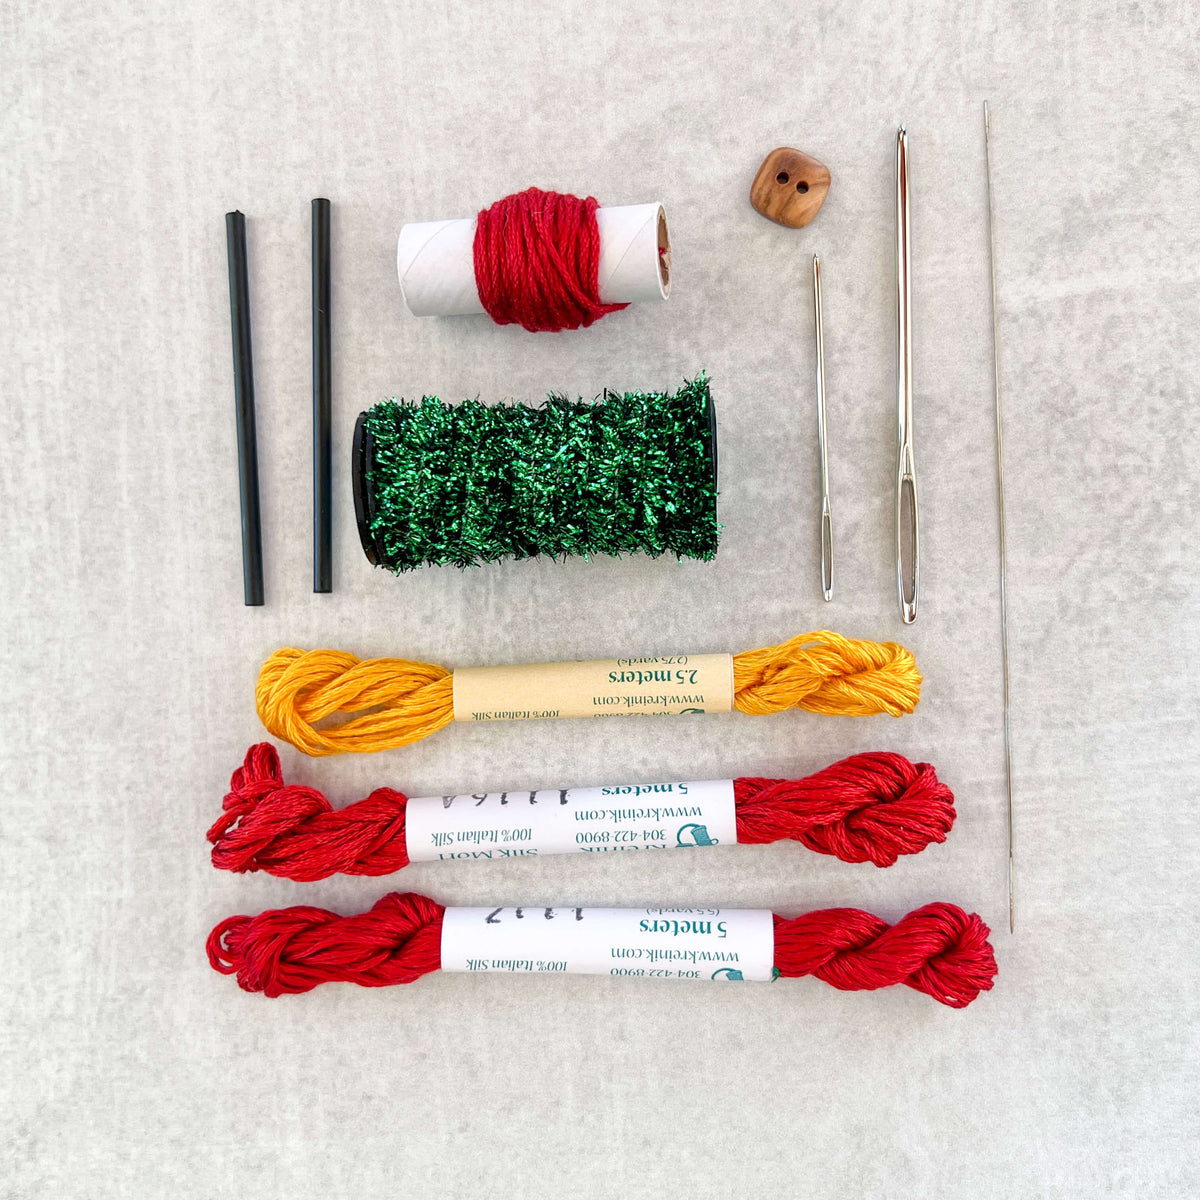 Handwoven Christmas Tree Ornament Kit - without the loom